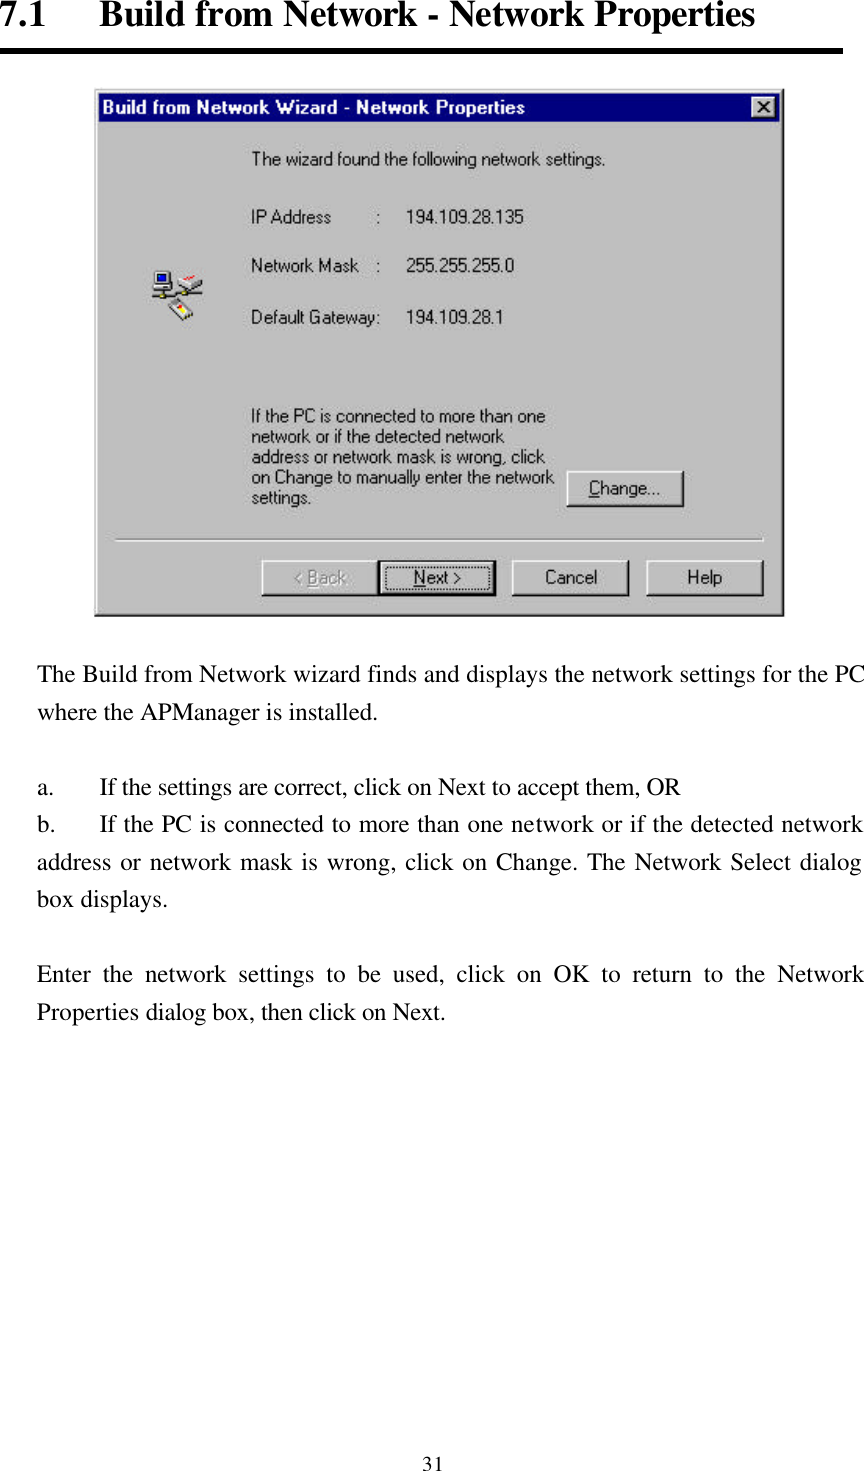  317.1   Build from Network - Network Properties   The Build from Network wizard finds and displays the network settings for the PC where the APManager is installed.    a. If the settings are correct, click on Next to accept them, OR b.  If the PC is connected to more than one network or if the detected network address or network mask is wrong, click on Change. The Network Select dialog box displays.    Enter the network settings to be used, click on OK to return to the Network Properties dialog box, then click on Next.     